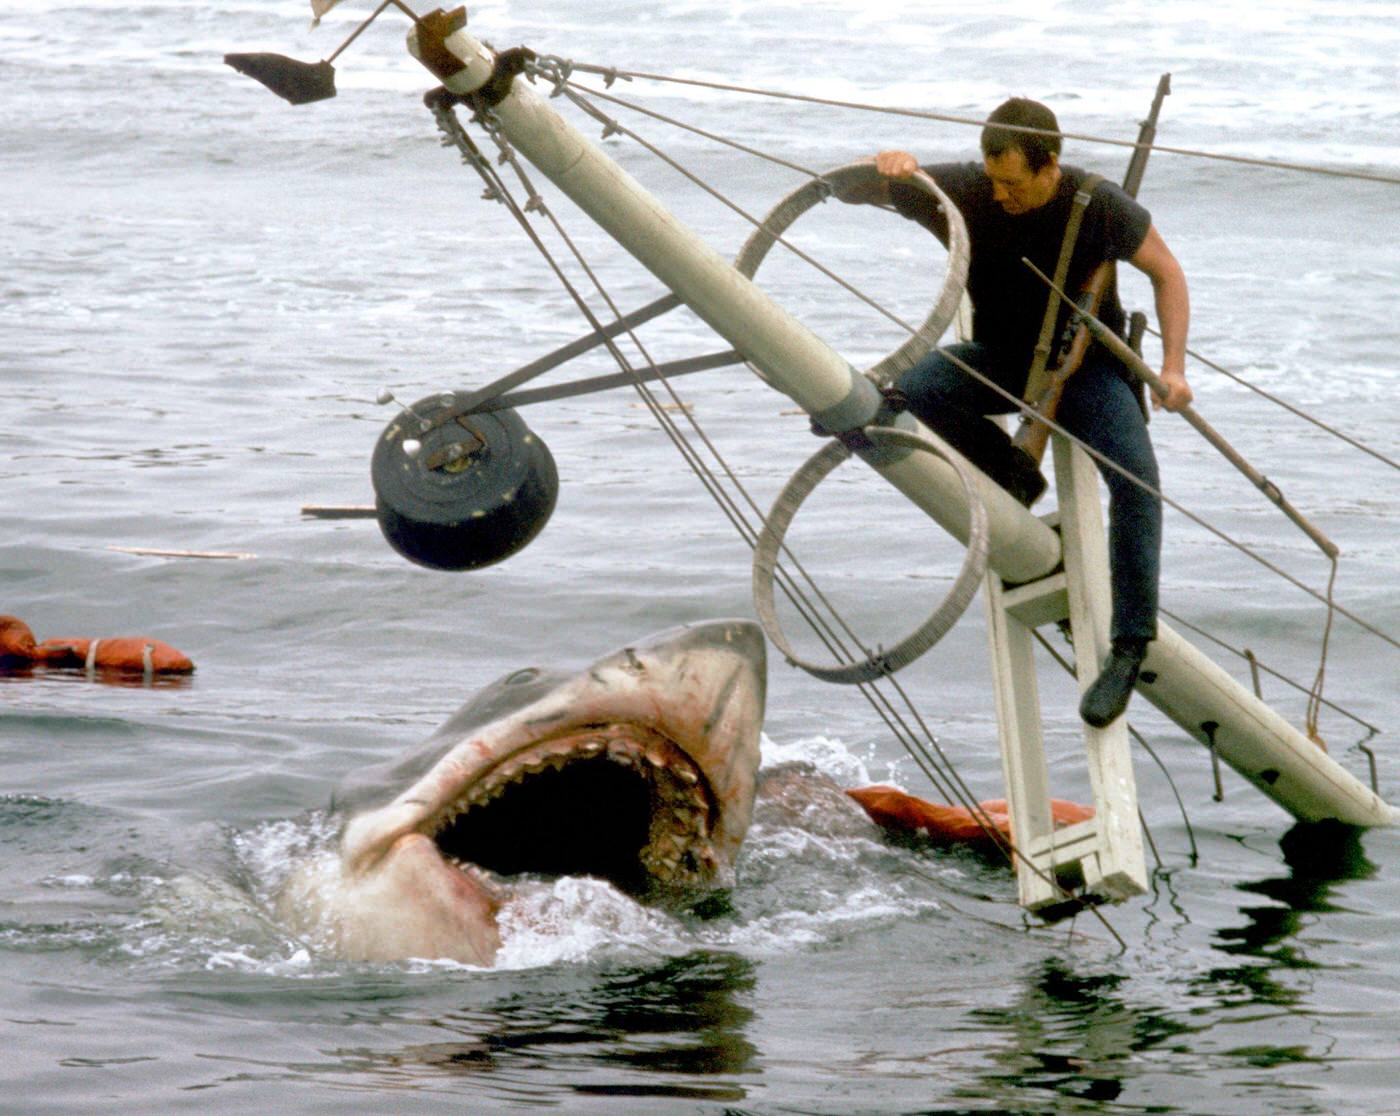 Roy Scheider on the set of Jaws, directed by Steven Spielberg.